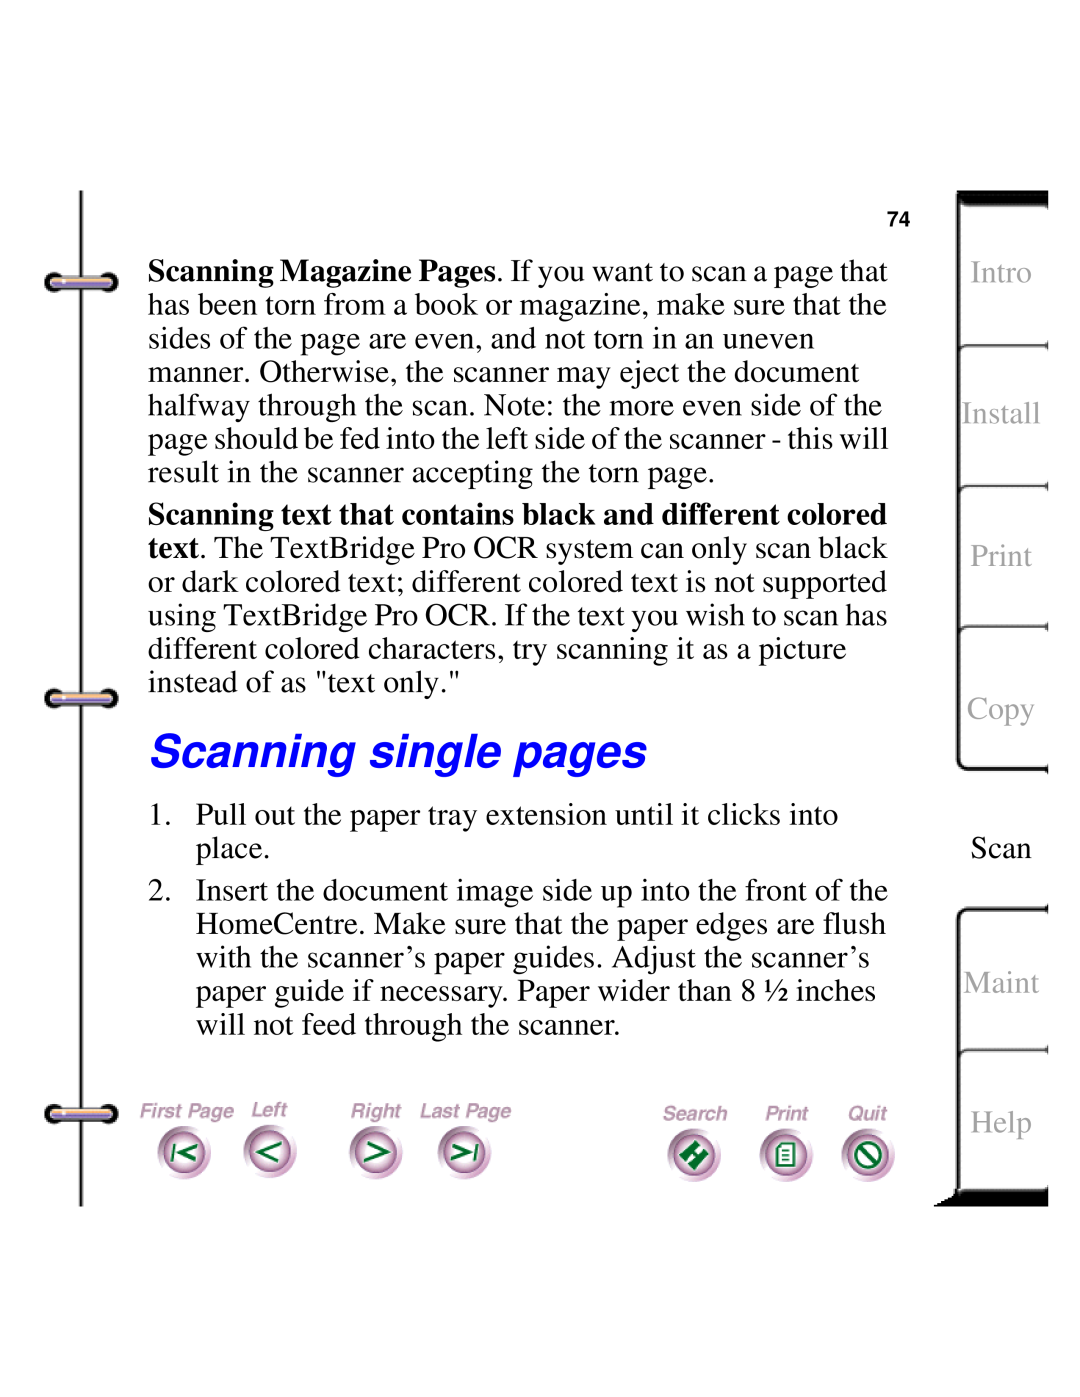 Xerox Document HomeCentre manual Scanning single pages, Intro Install Print Copy, Maint, Help 